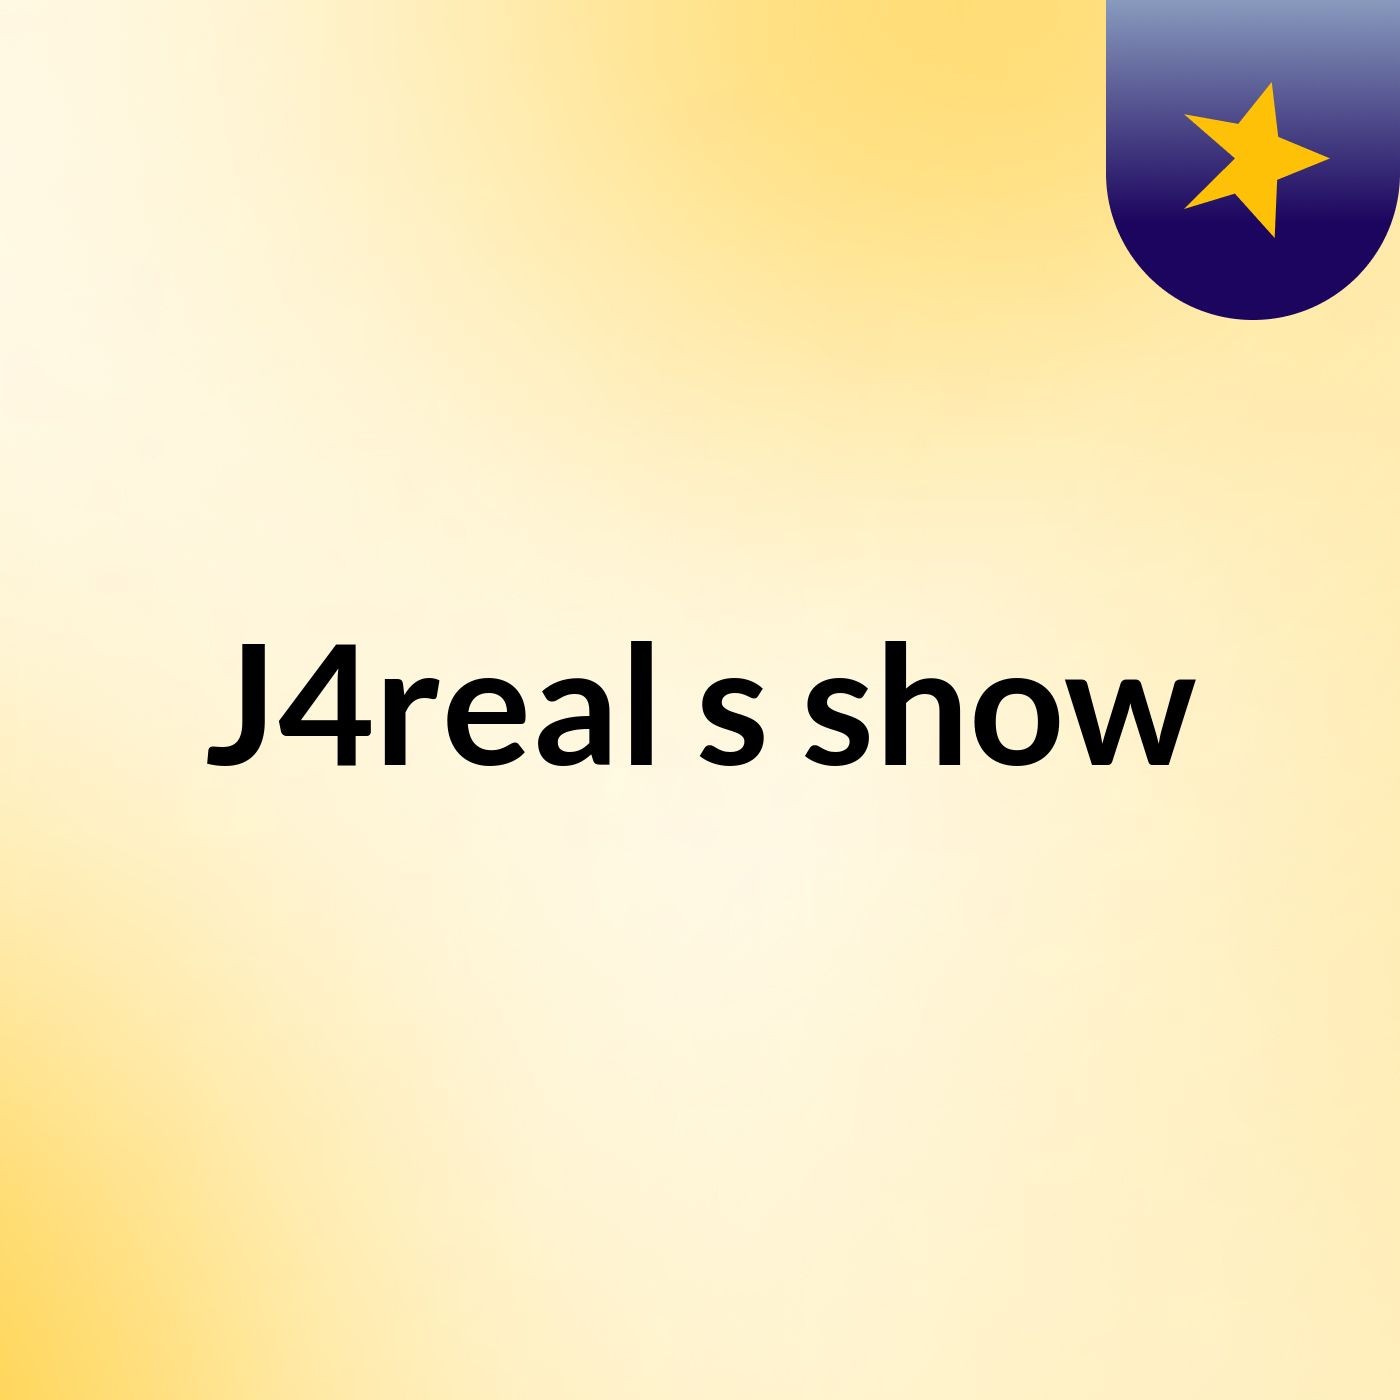 J4real's show